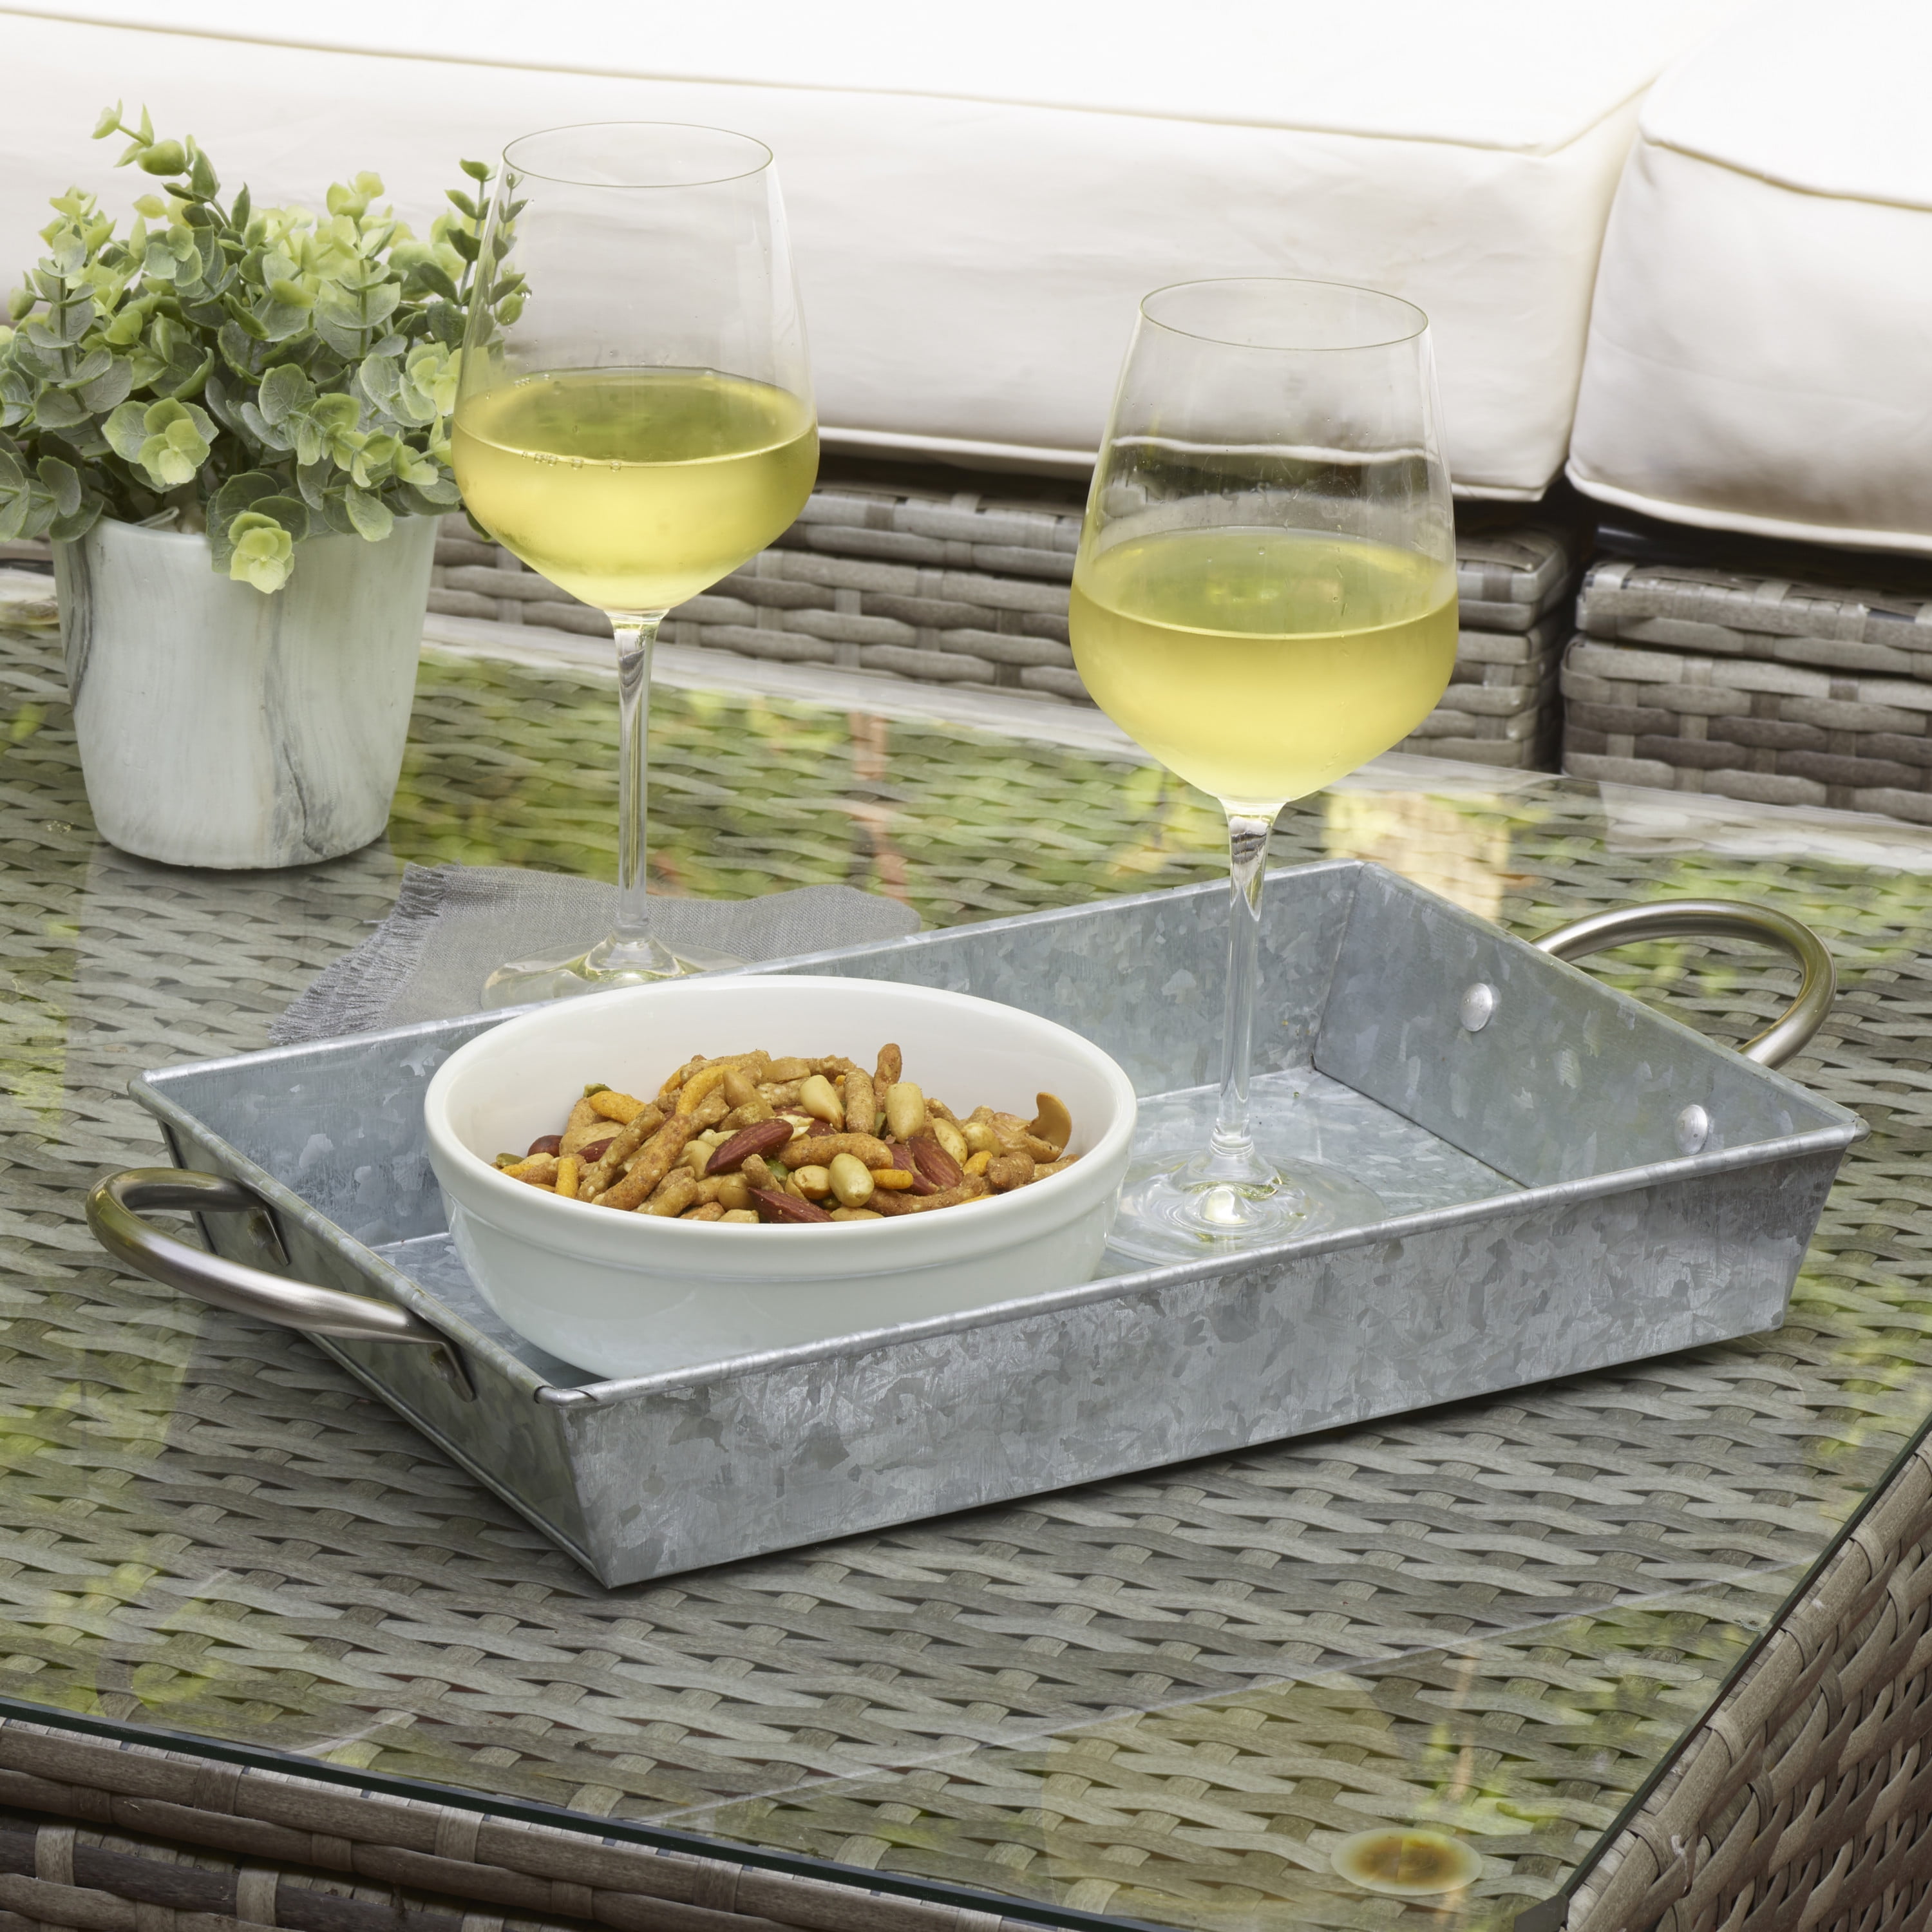 Towle Galvanized Hammered Divided Napkin Tray | Meijer